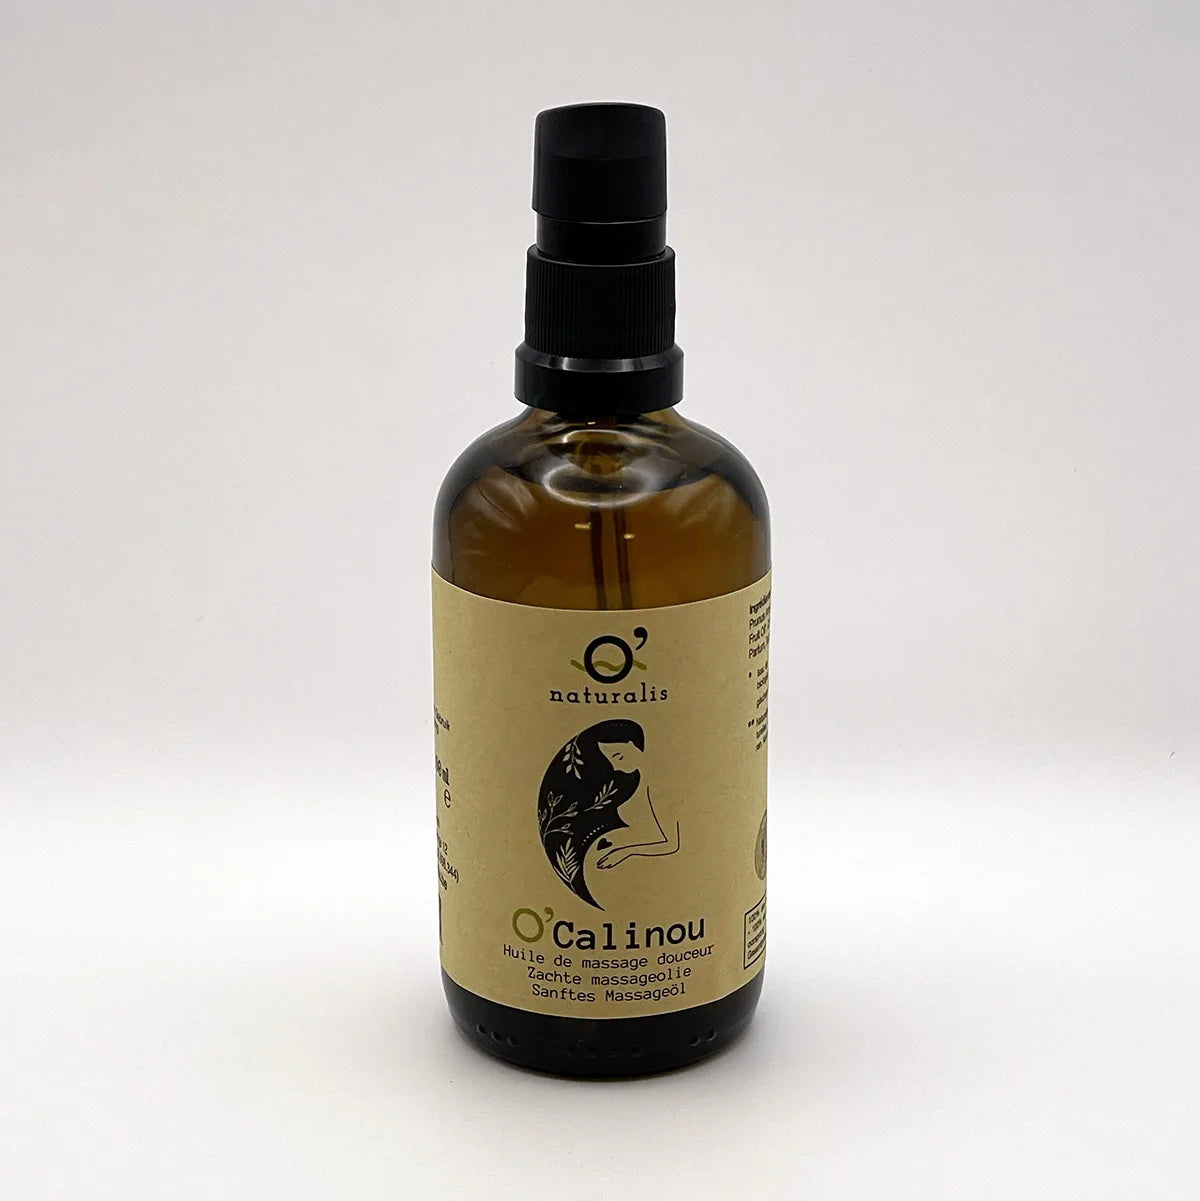 NEW! O’Calinou, massage oil for babies and (future) mothers